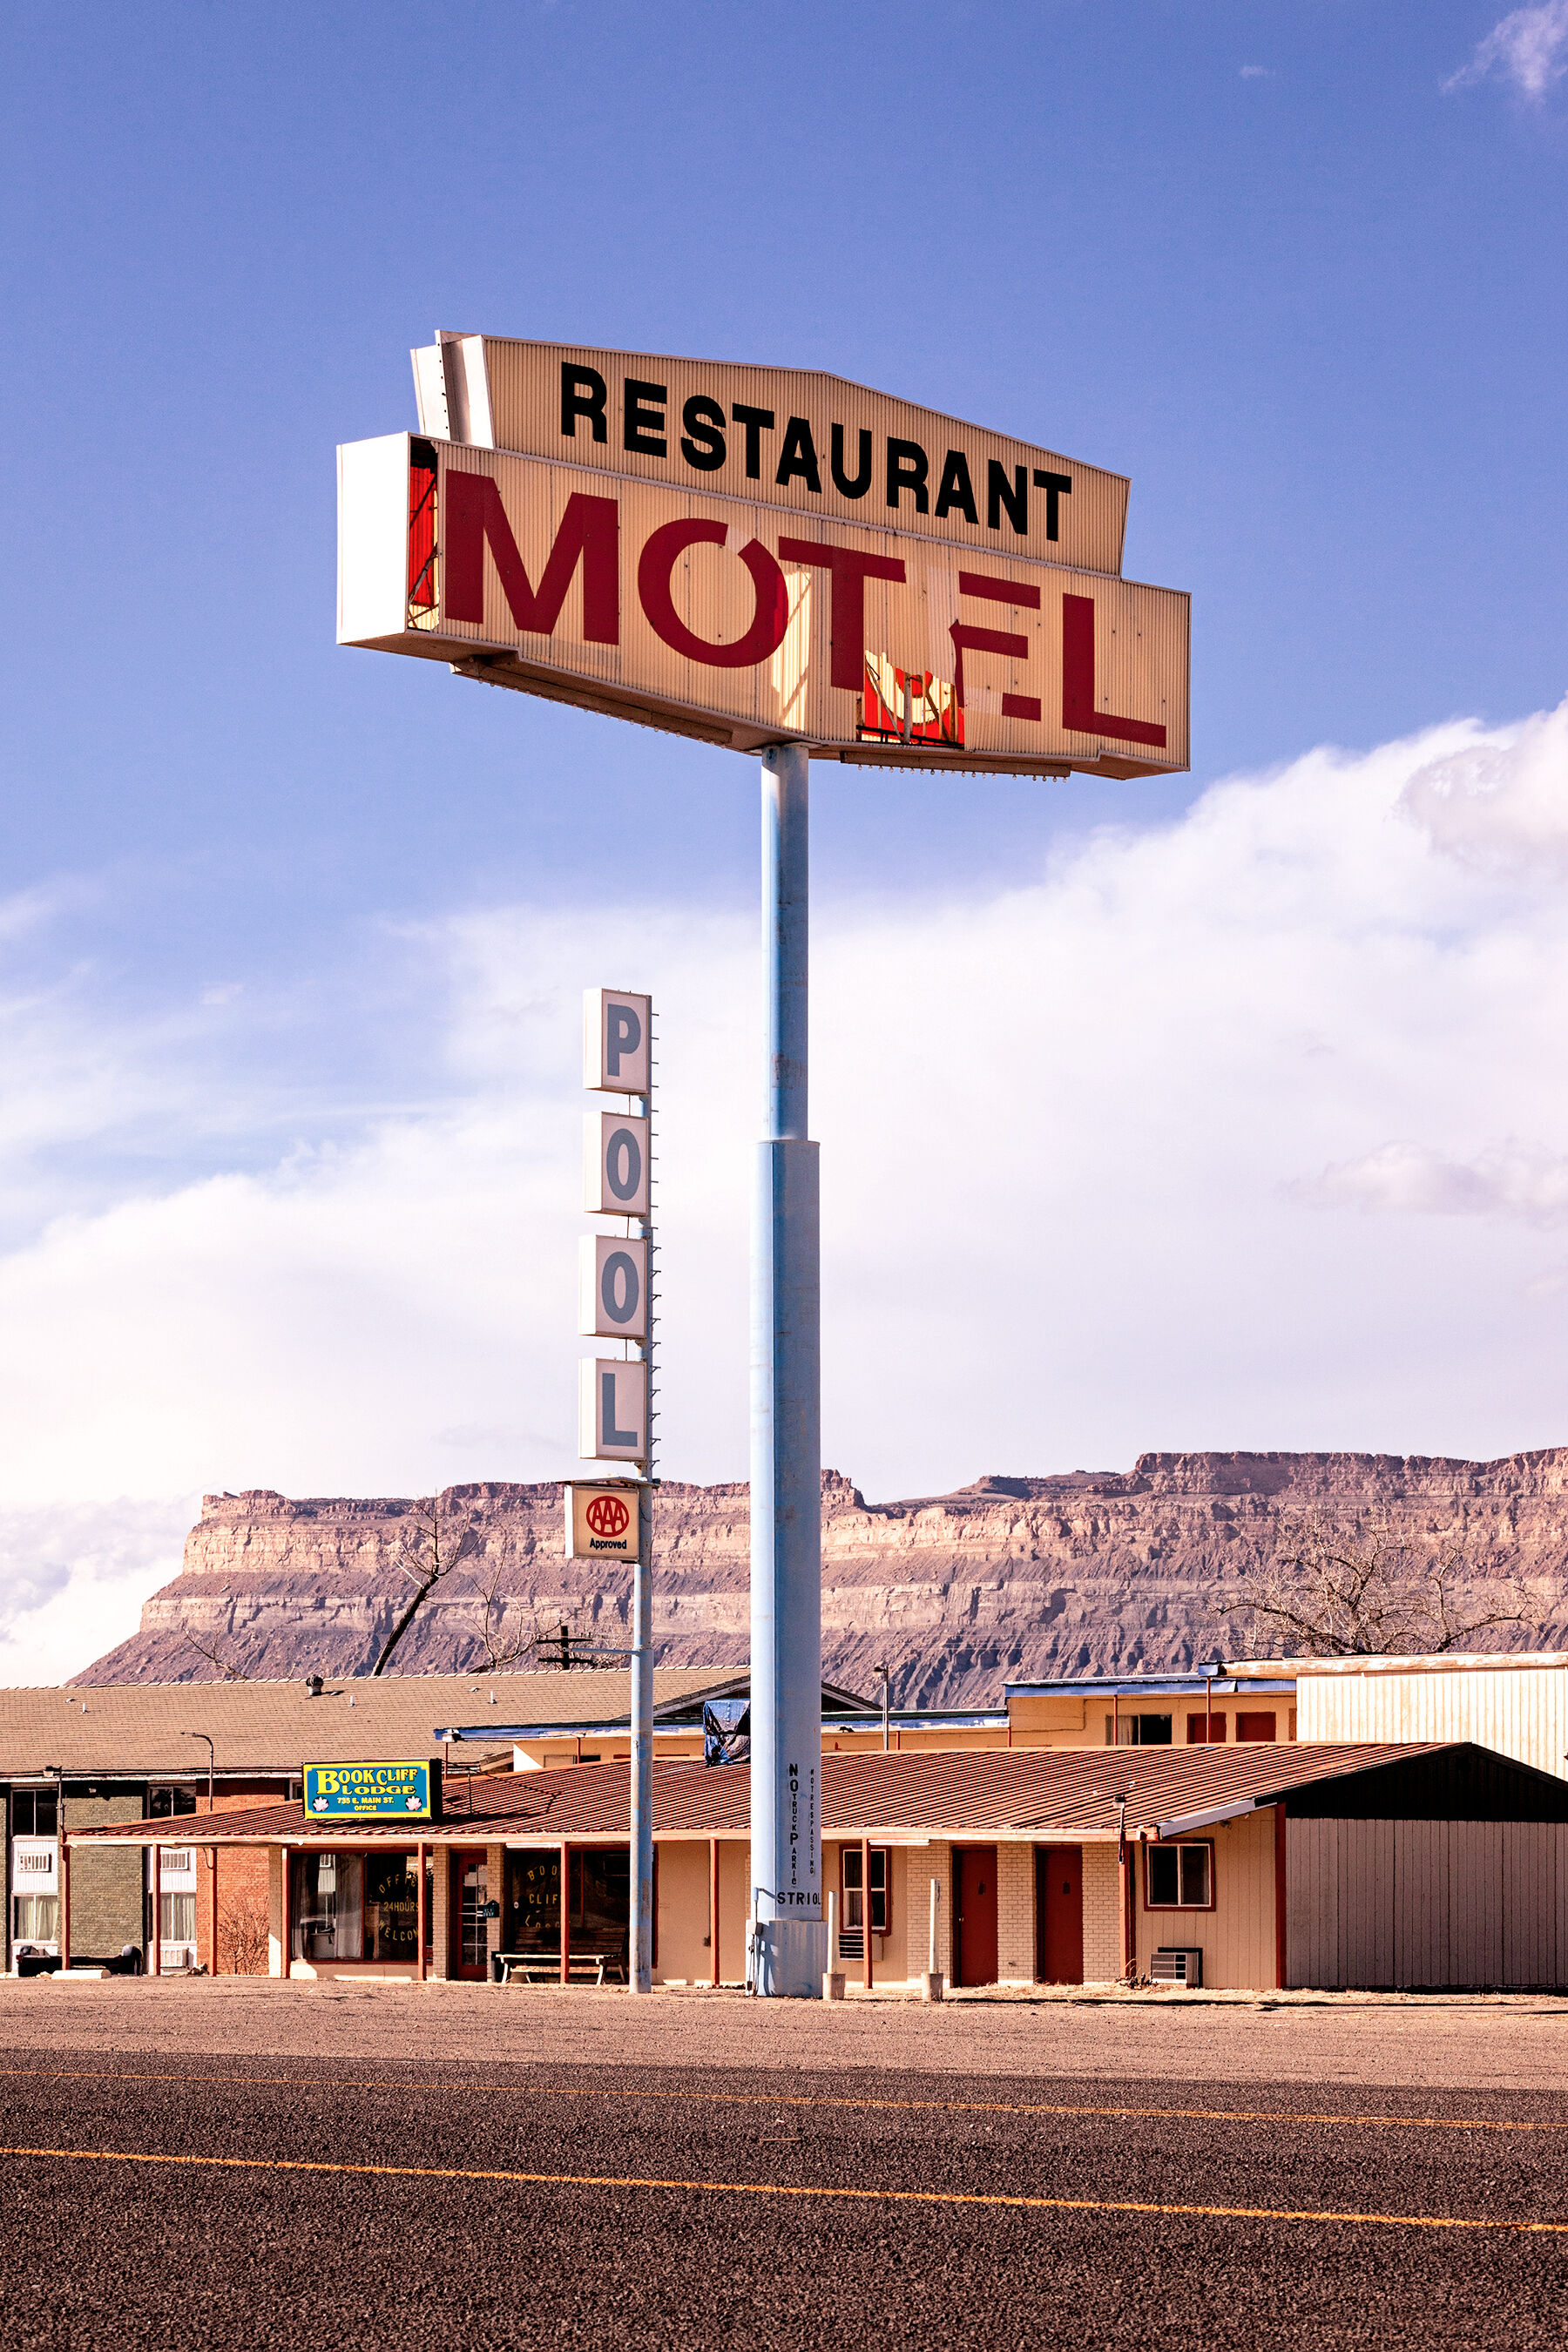 Very tall old motel sign in Green River, Utah with sandstone cliffs in the background